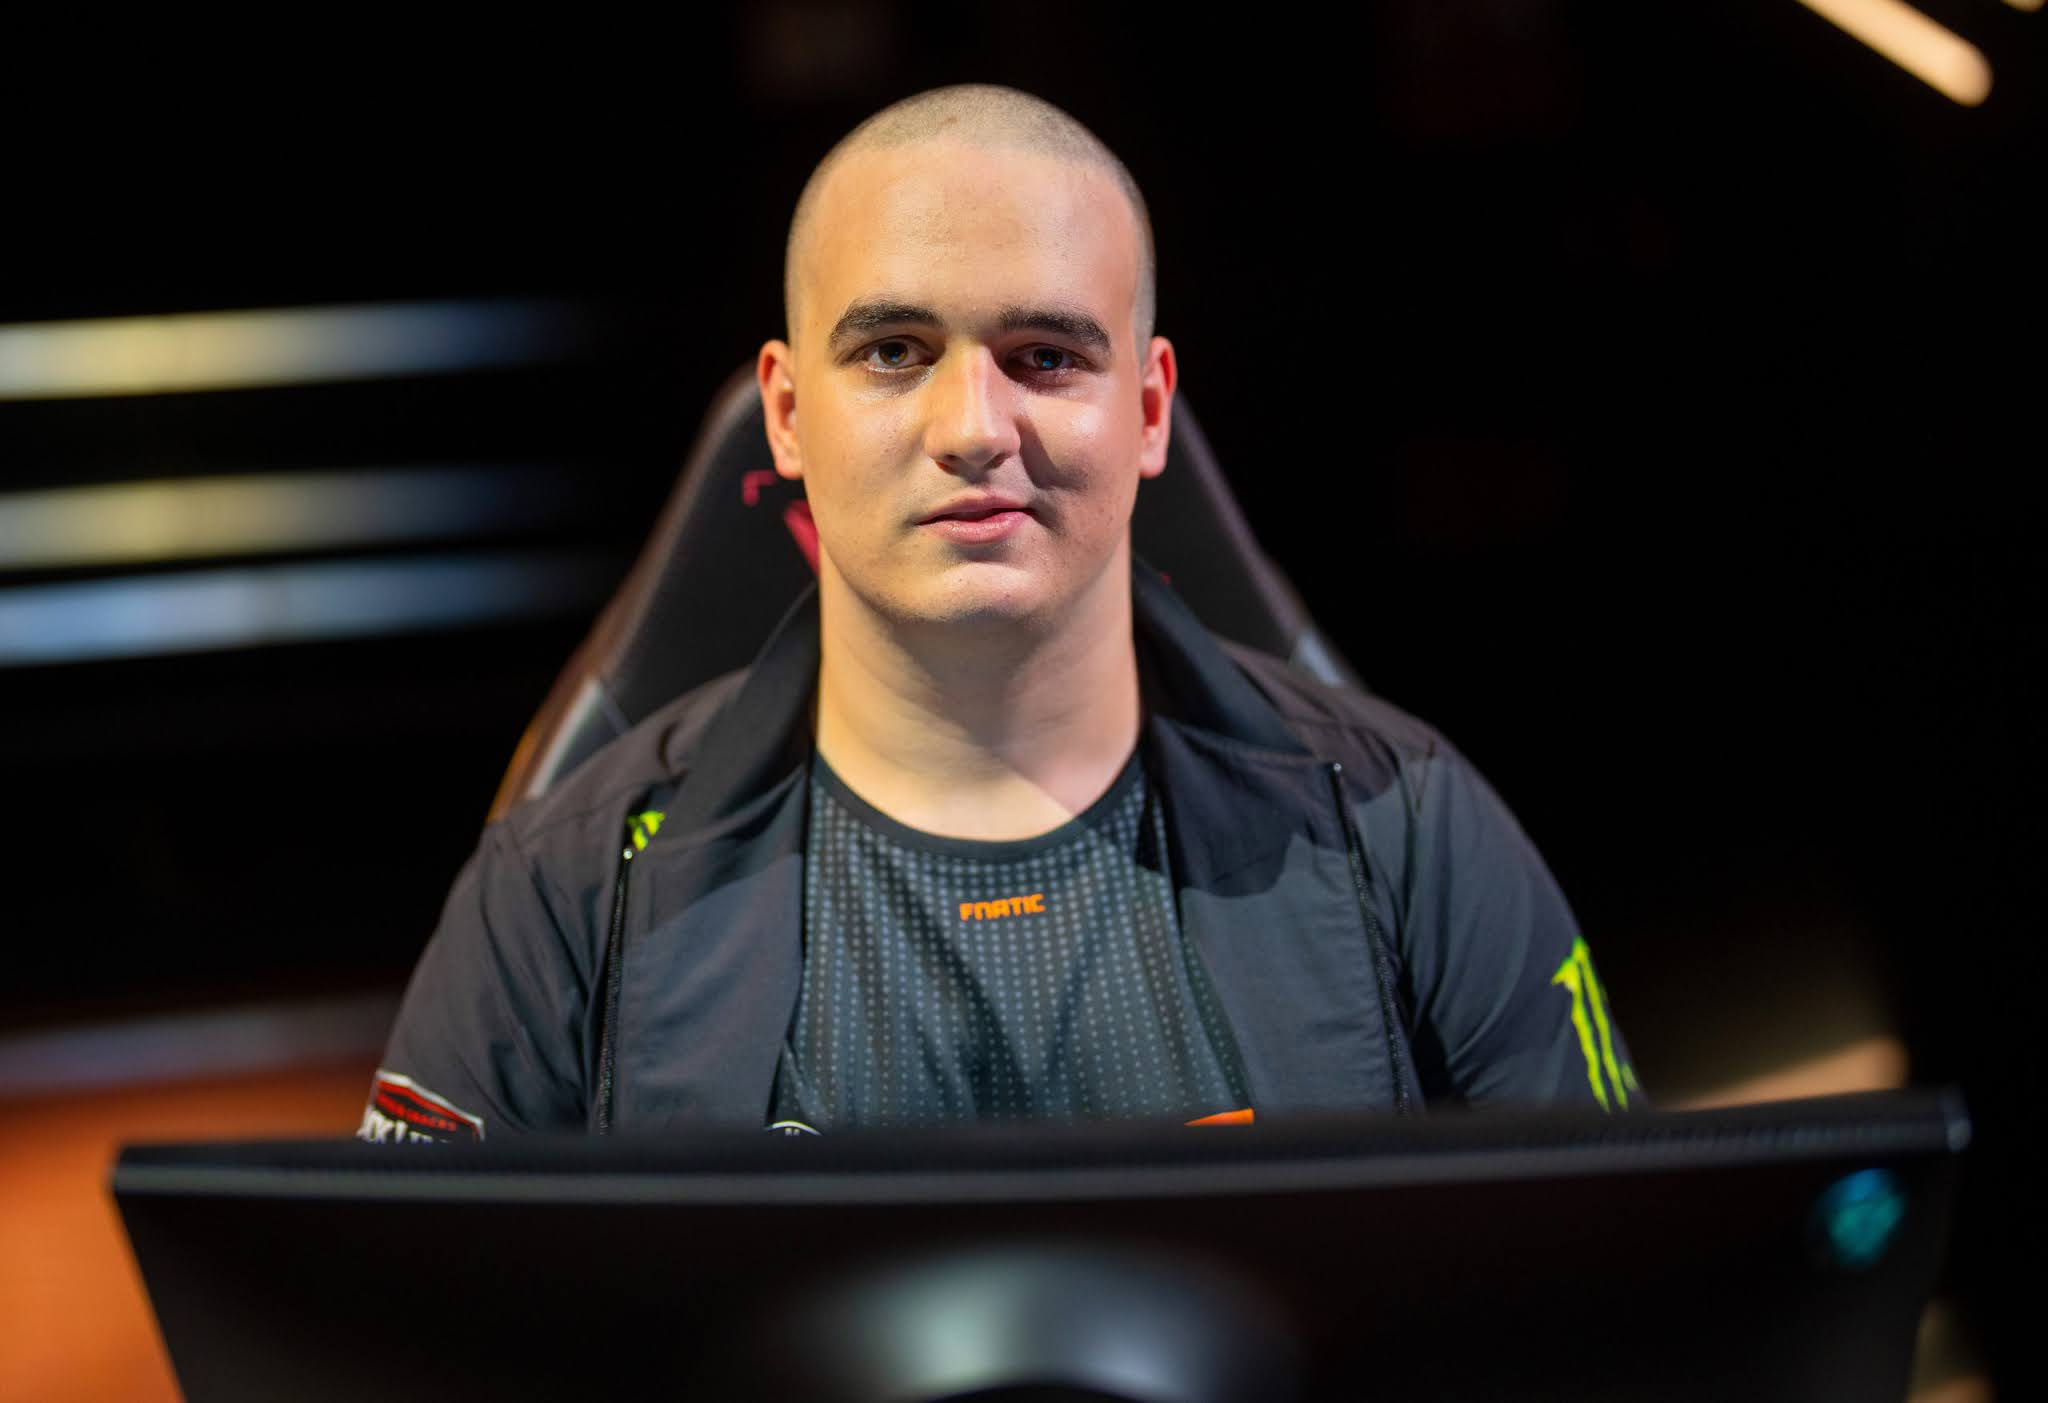 Fnatic is said to be different from Doma. separate